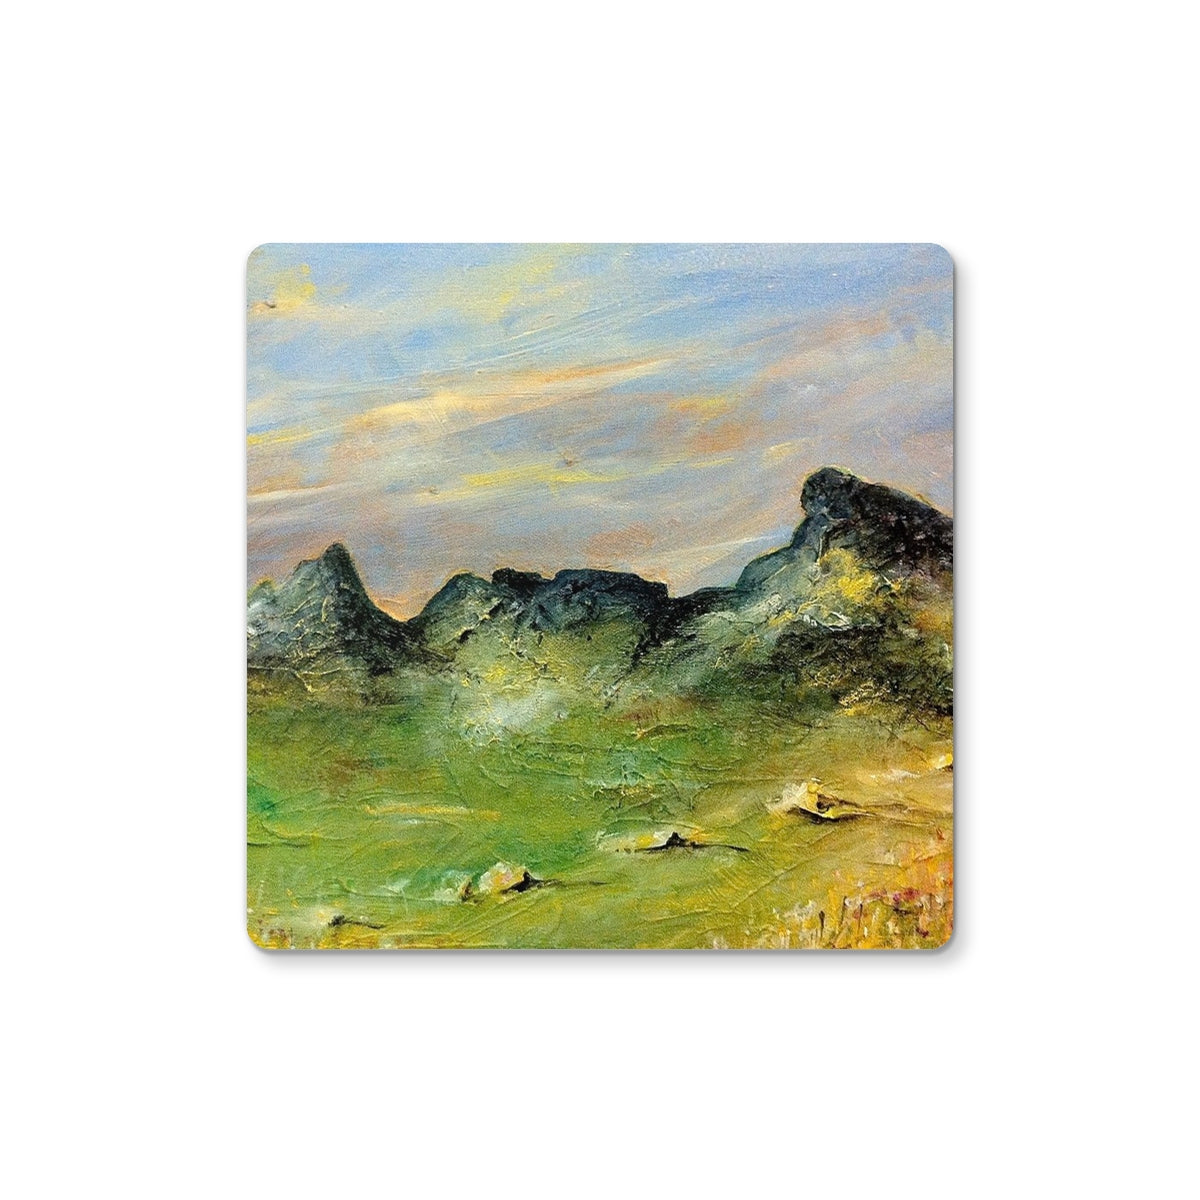 The Cobbler Art Gifts Coaster-Homeware-Scottish Lochs & Mountains Art Gallery-2 Coasters-Paintings, Prints, Homeware, Art Gifts From Scotland By Scottish Artist Kevin Hunter